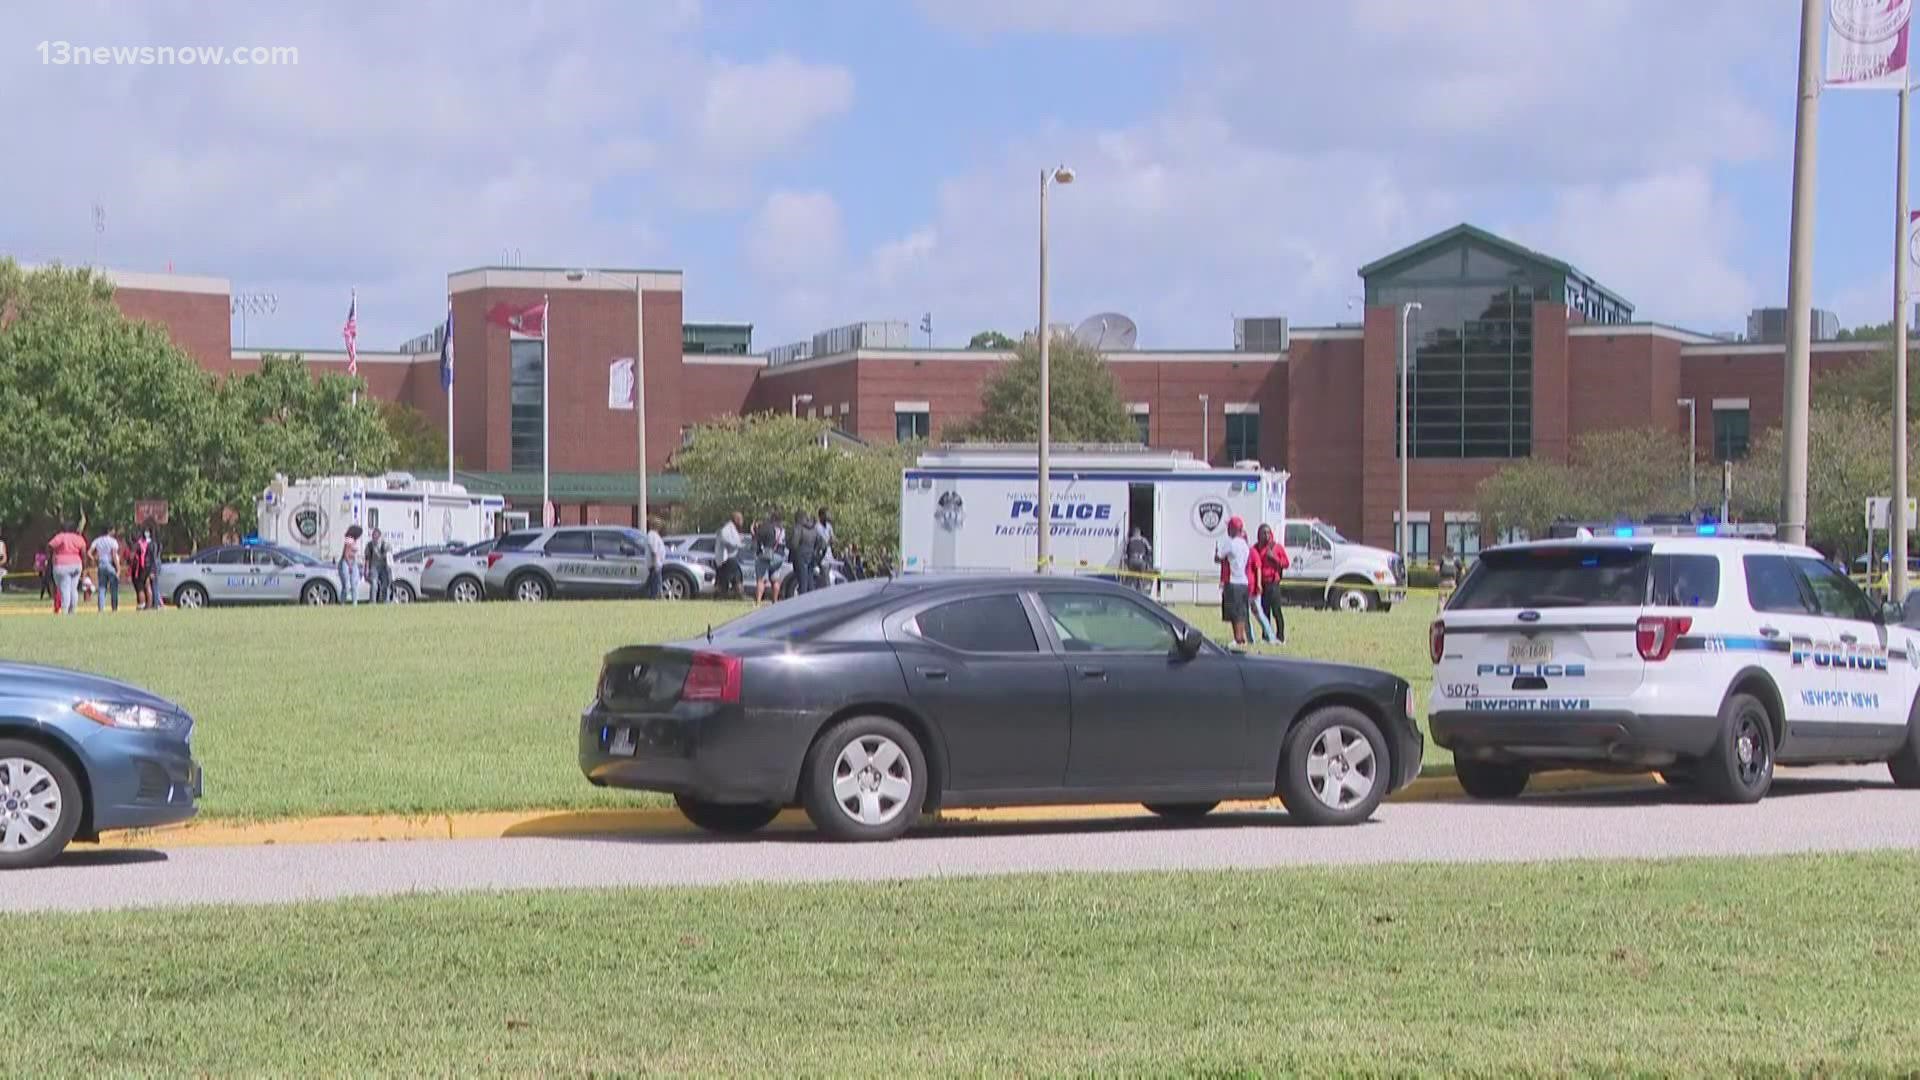 Here's the latest footage and information from the shooting at Heritage High School.